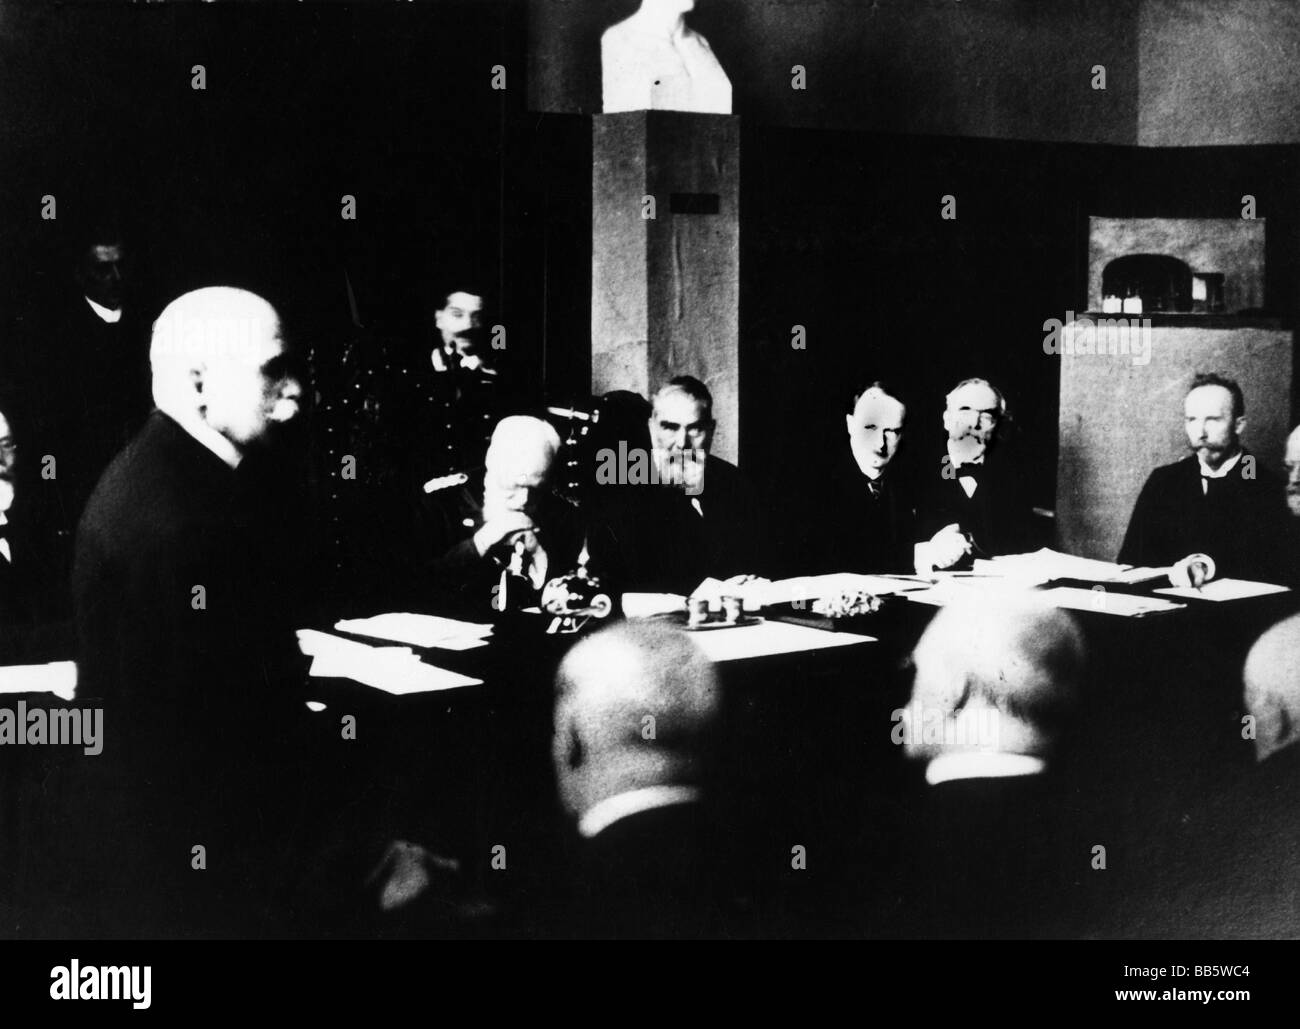 Louis III, 7.1.1845 - 18.10.1921, King of Bavaria 5.11.1913 - 8.11.1919, conference of the board of the Deutsches Museum, Munich, 1916, , Stock Photo